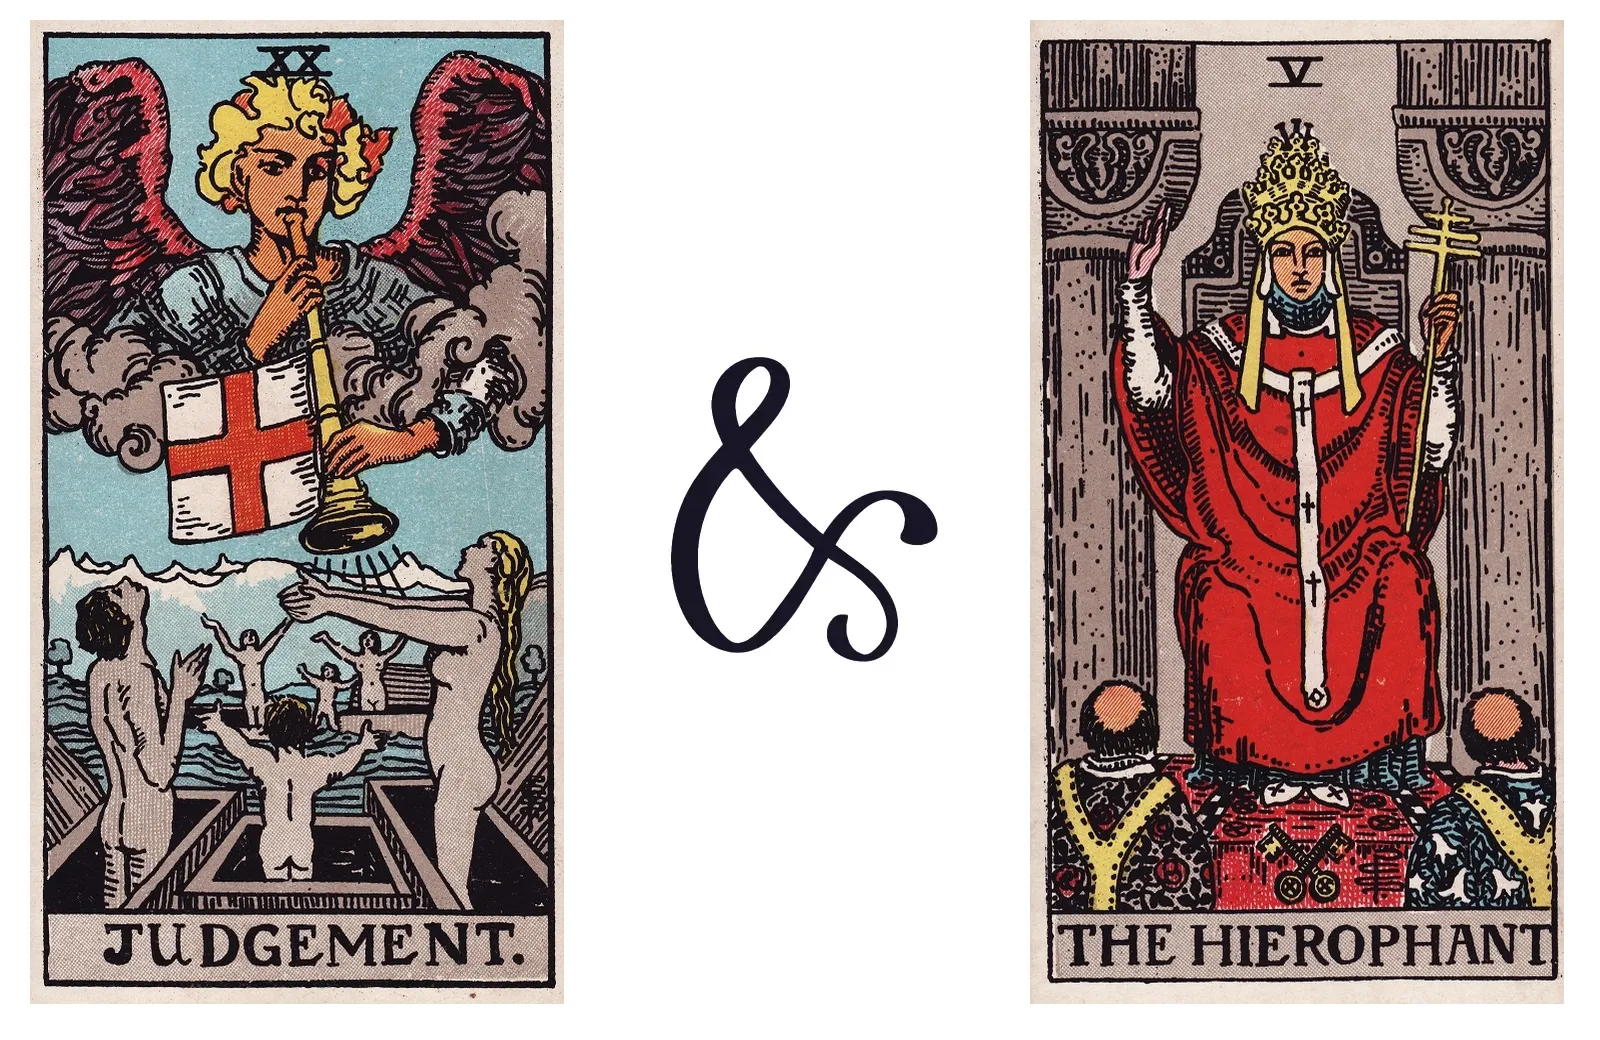 Judgement and The Hierophant